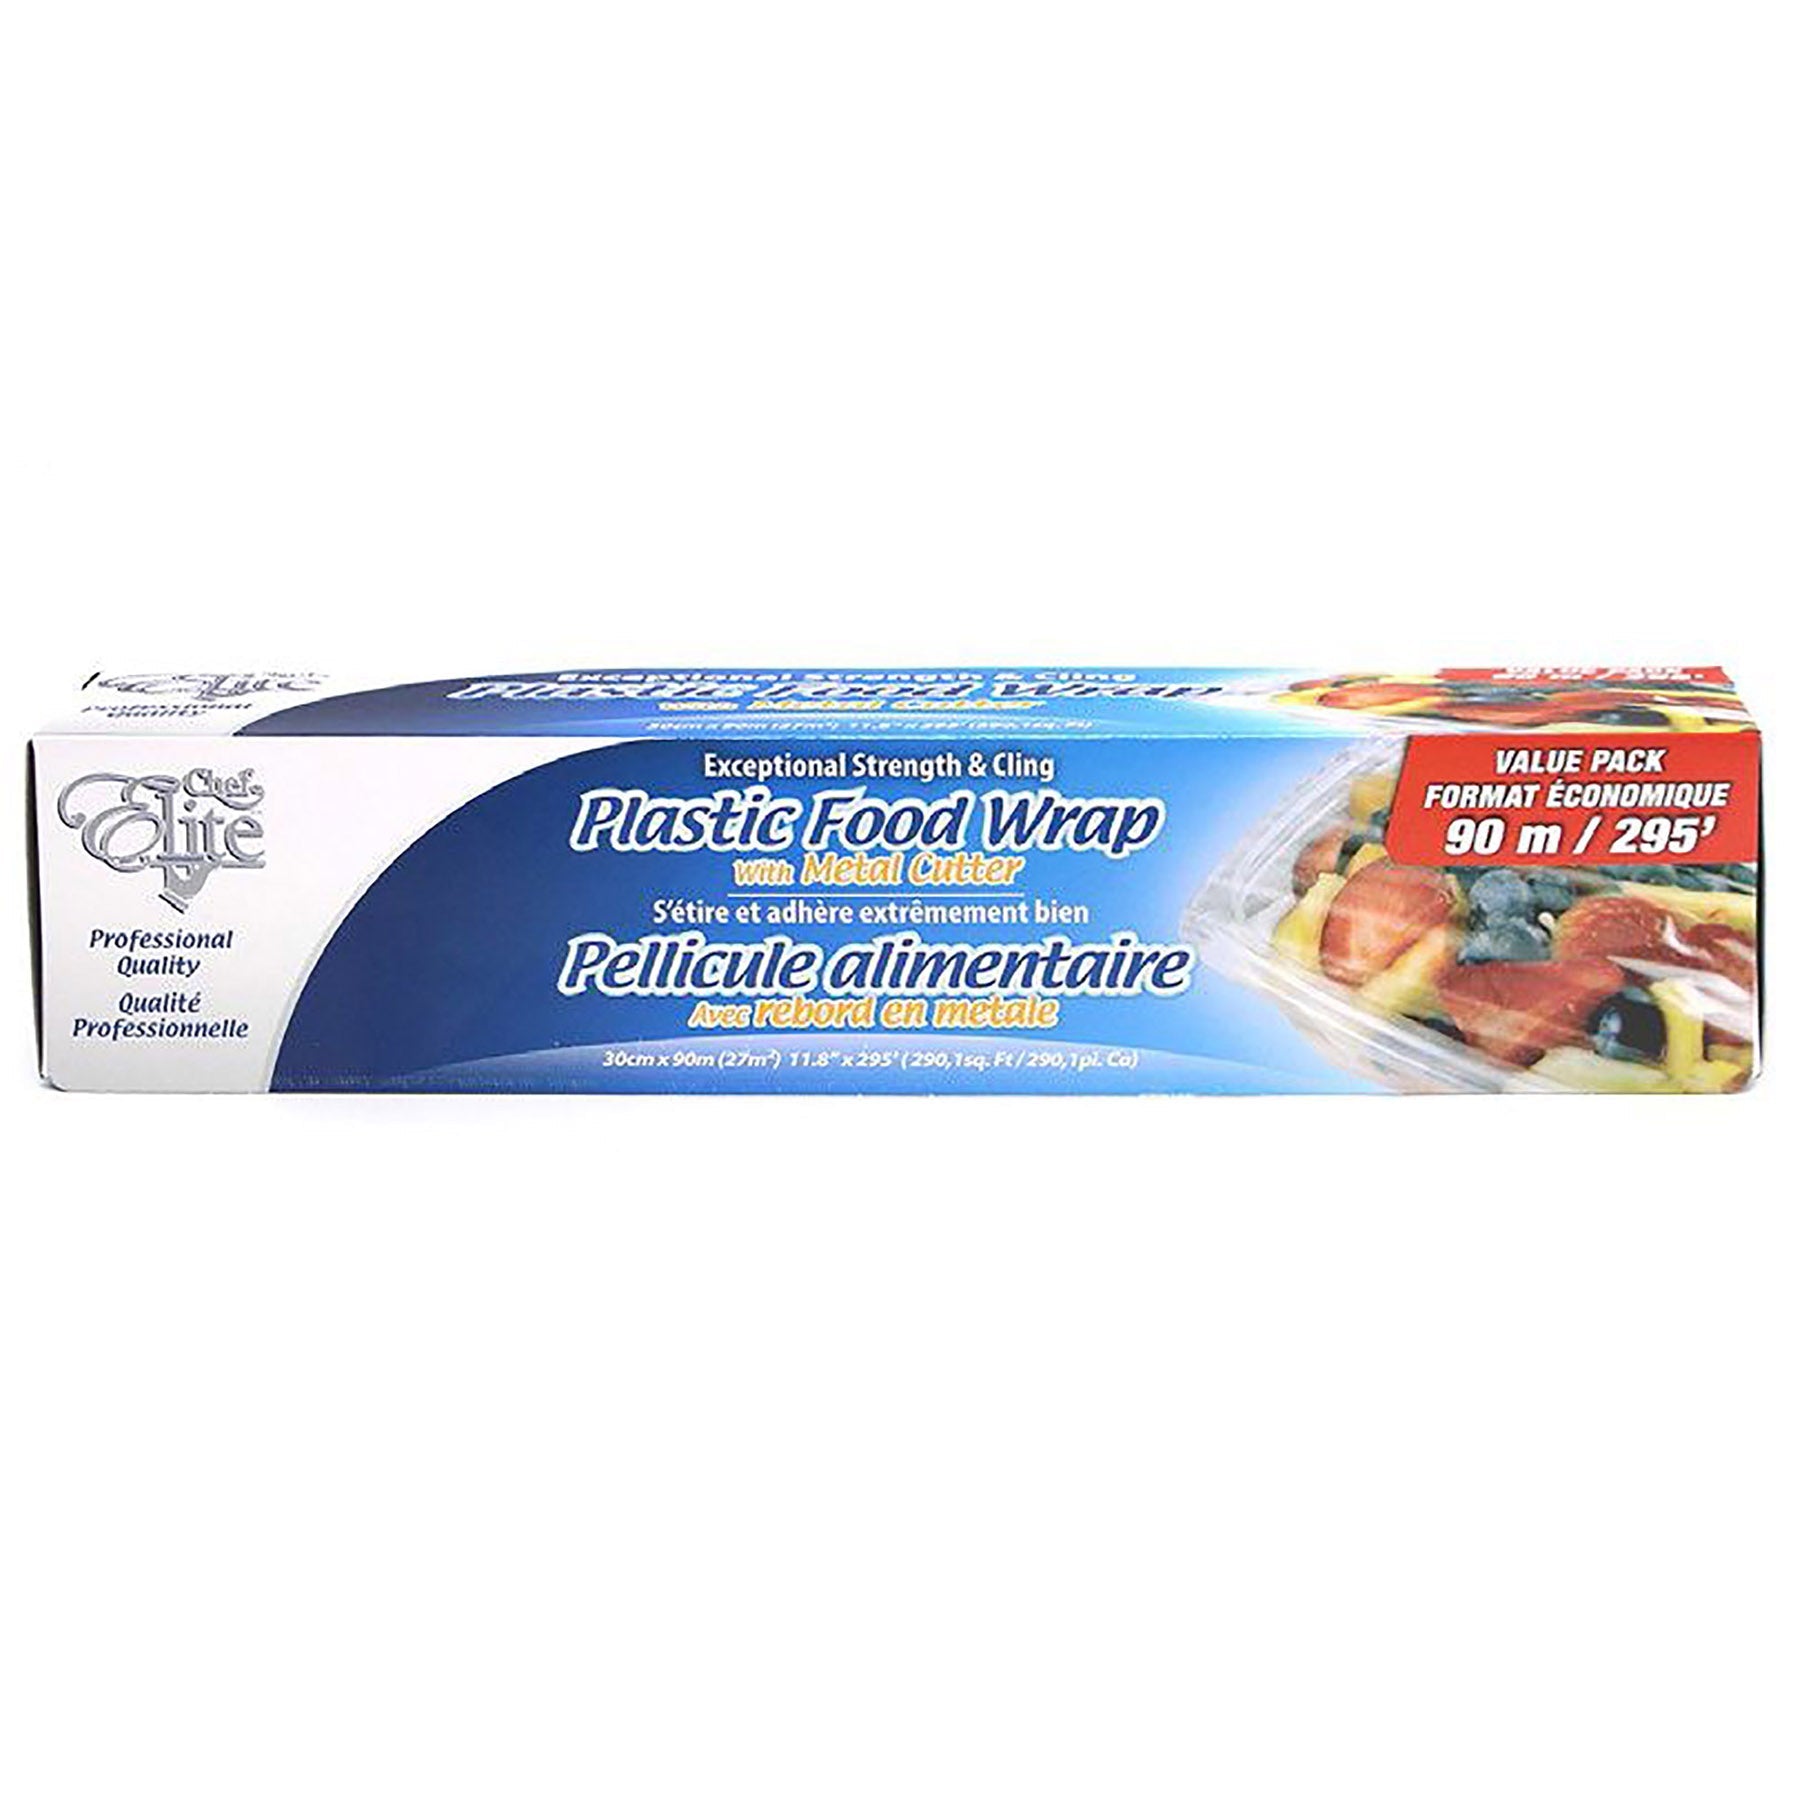 Chef Elite Plastic Food Wrap with Metal Cutter 11.8in x 295ft